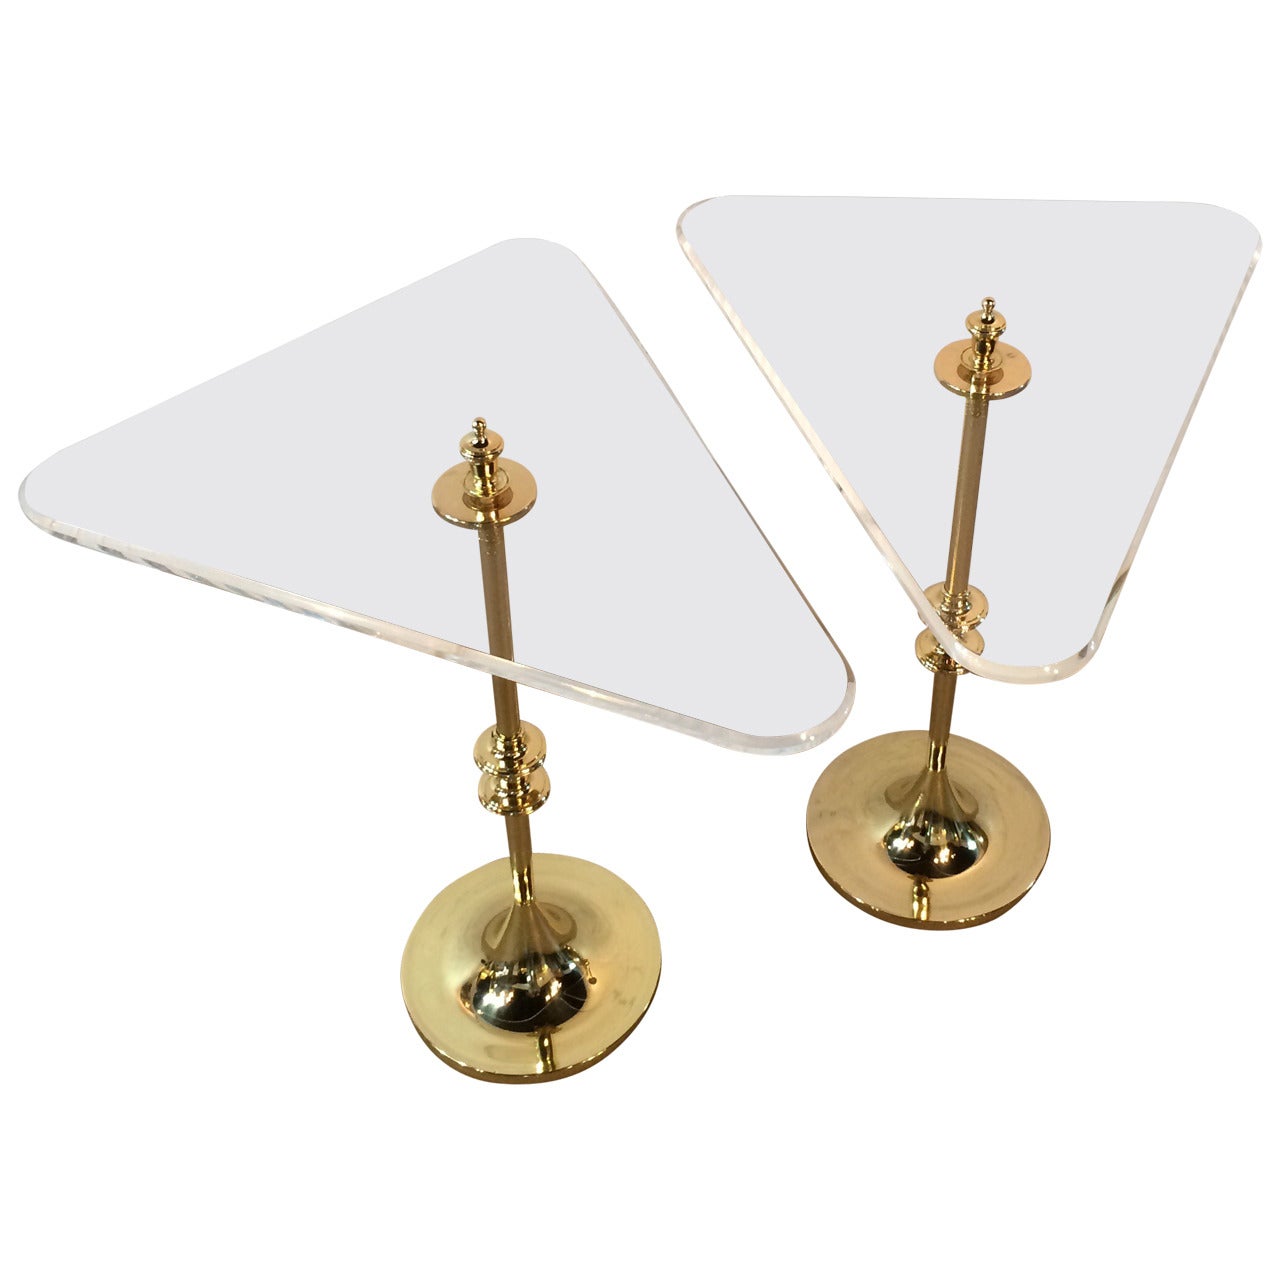 Stunning Pair of Polished Brass and Acrylic Side Tables